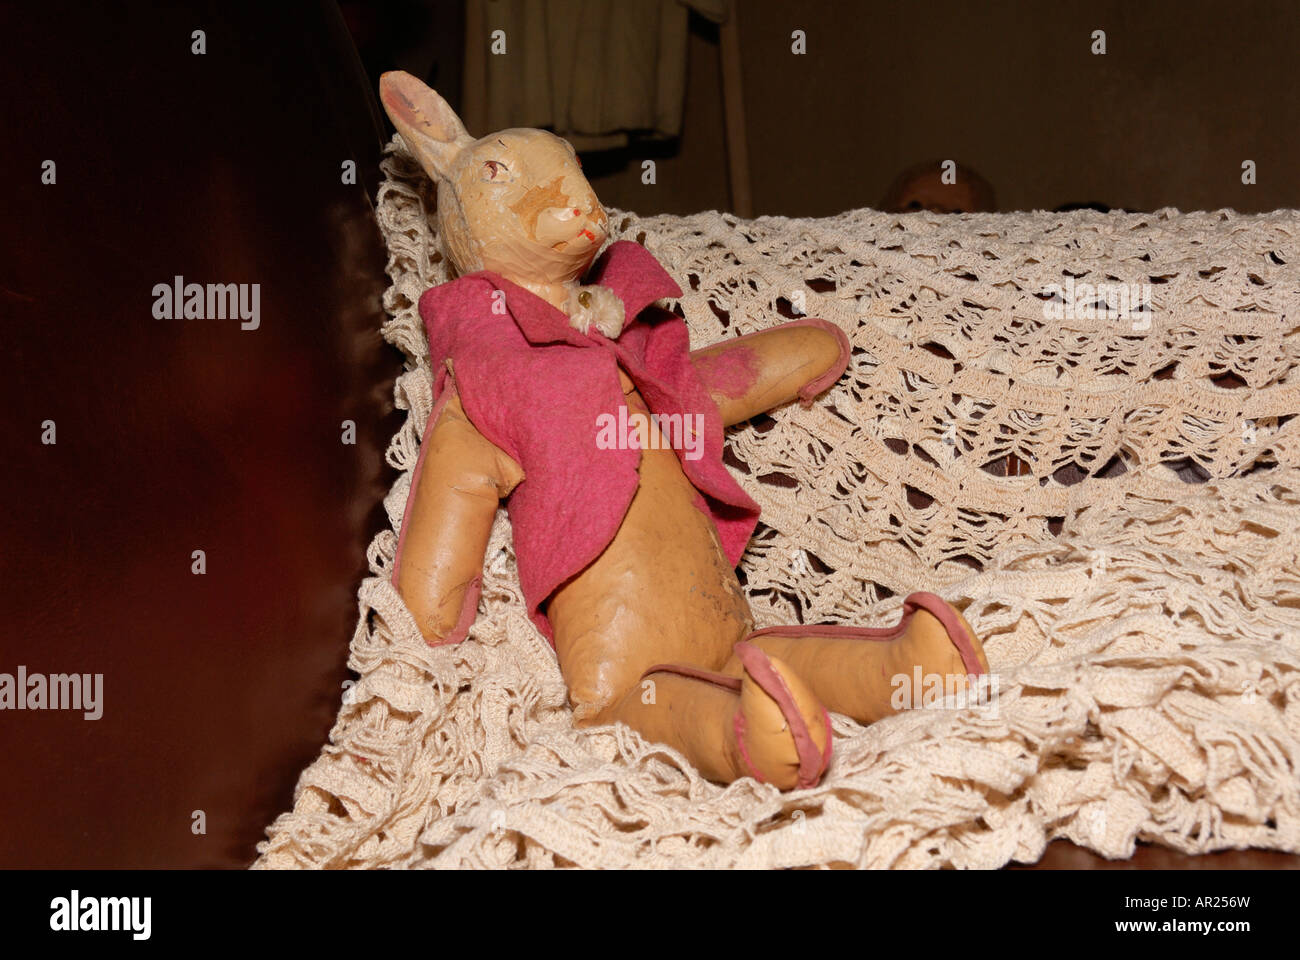 Antique bunny doll on lace afghan sitting on a couch Stock Photo